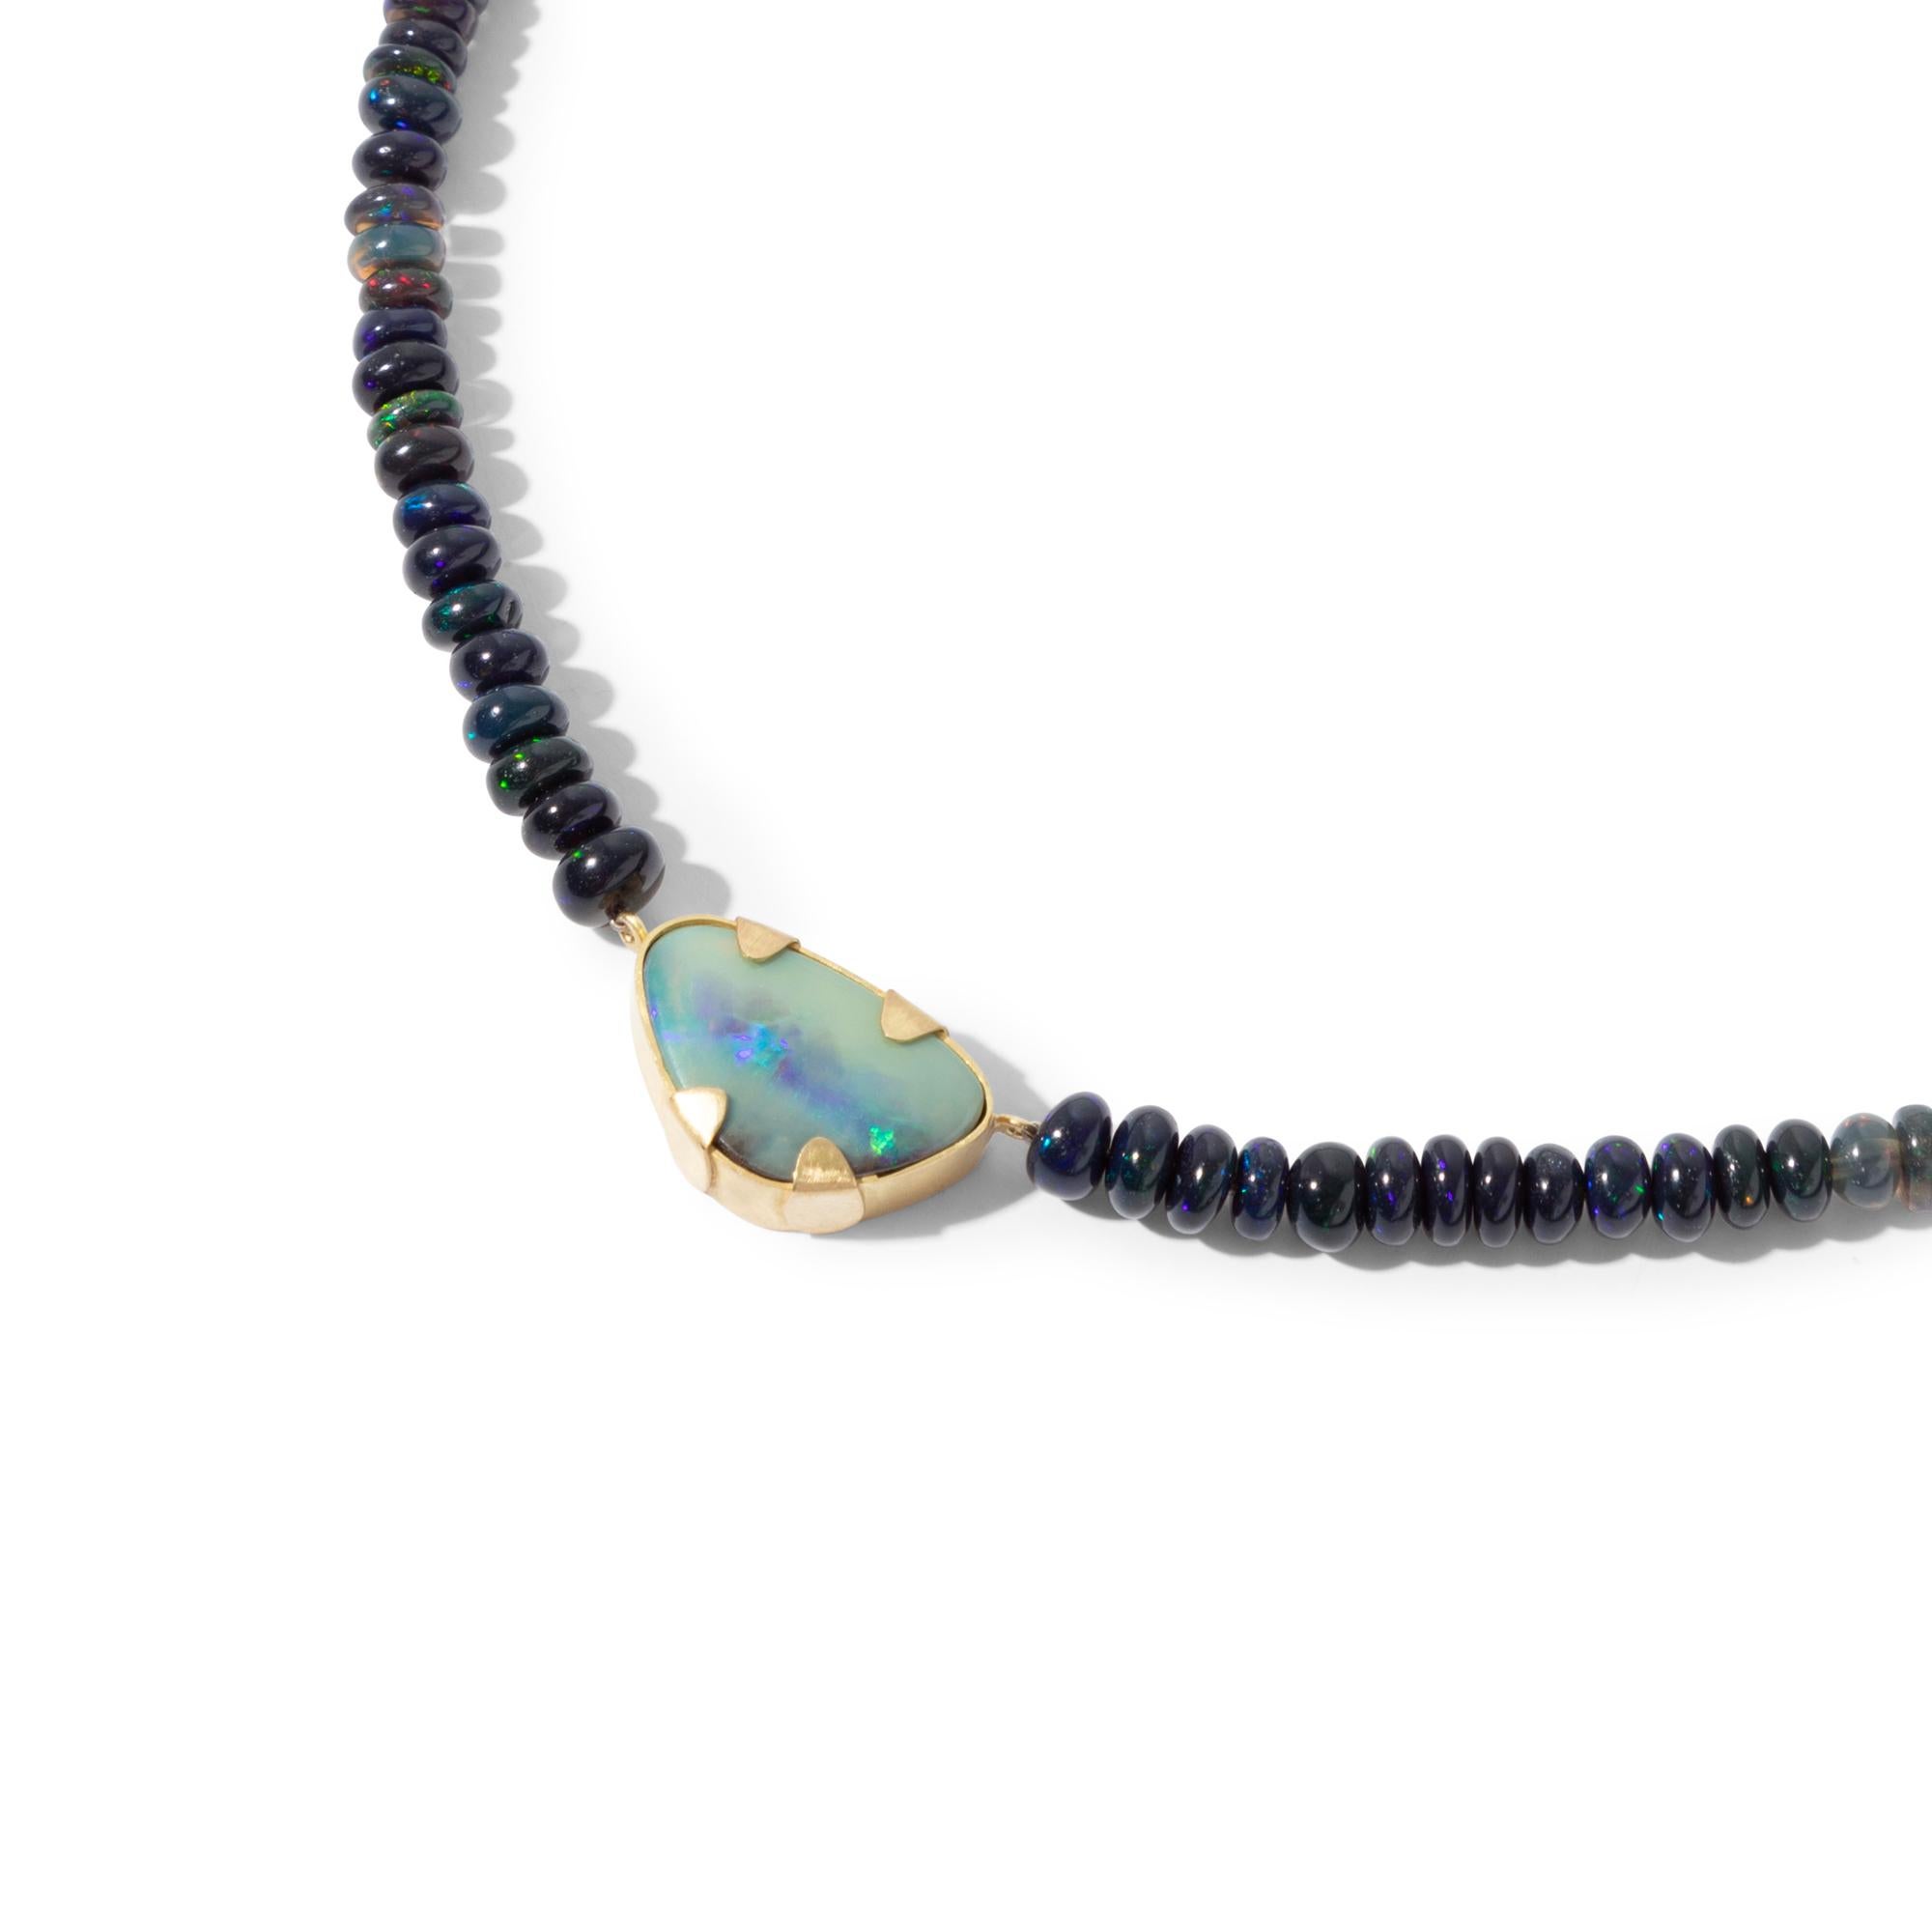 A lovely and intriguing necklace with a mesmerising natural Australian black opal pendant strung on dark opal beads. The iridescent stripe across the boulder opal shows plenty 